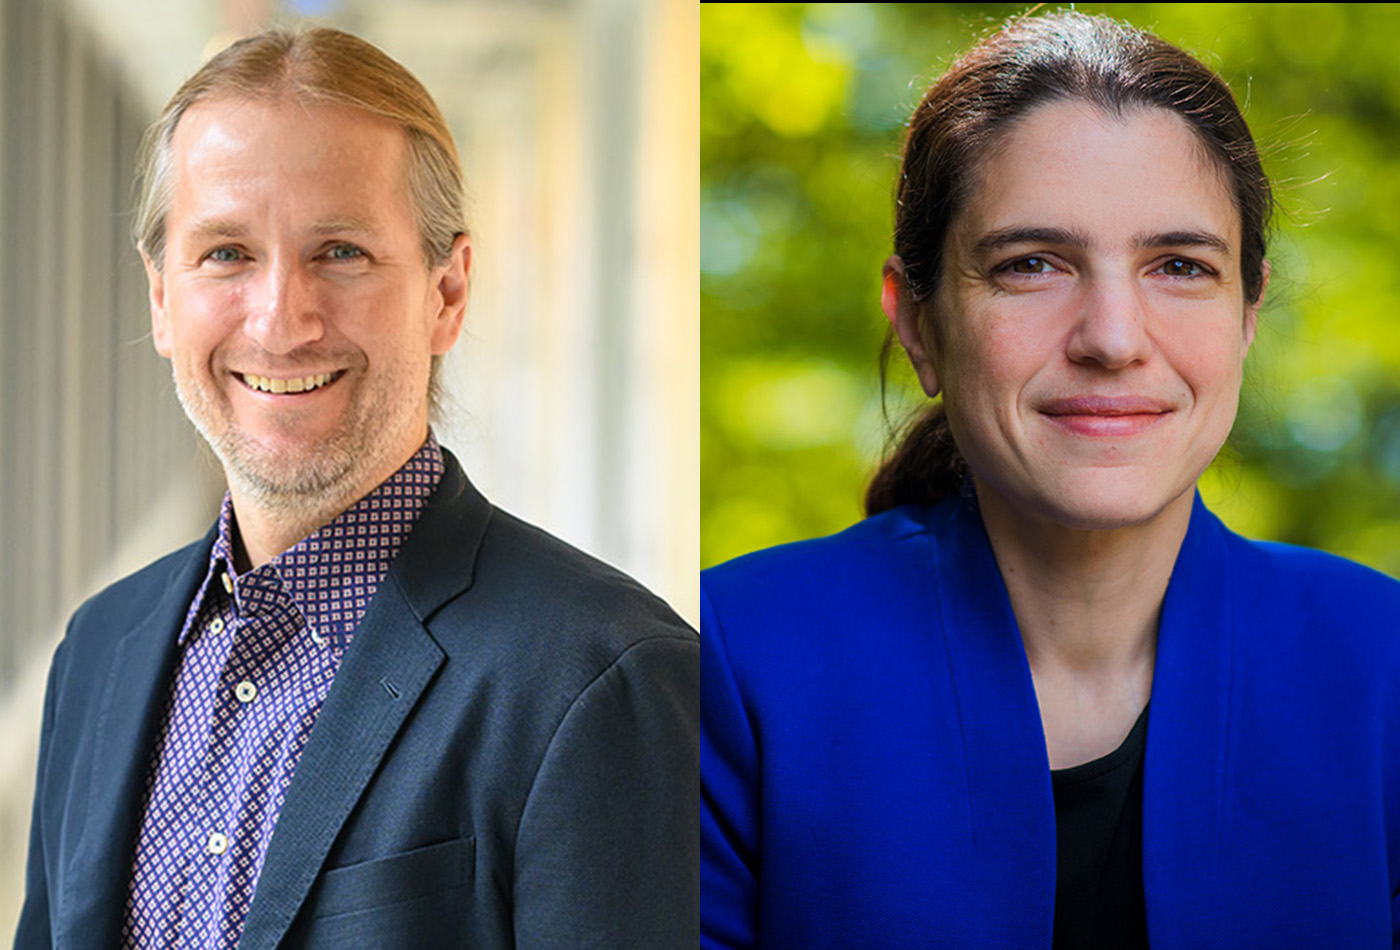 Jeremiah Johnson (Left) and Heather Kulik (Right) smile in their respective headshots.